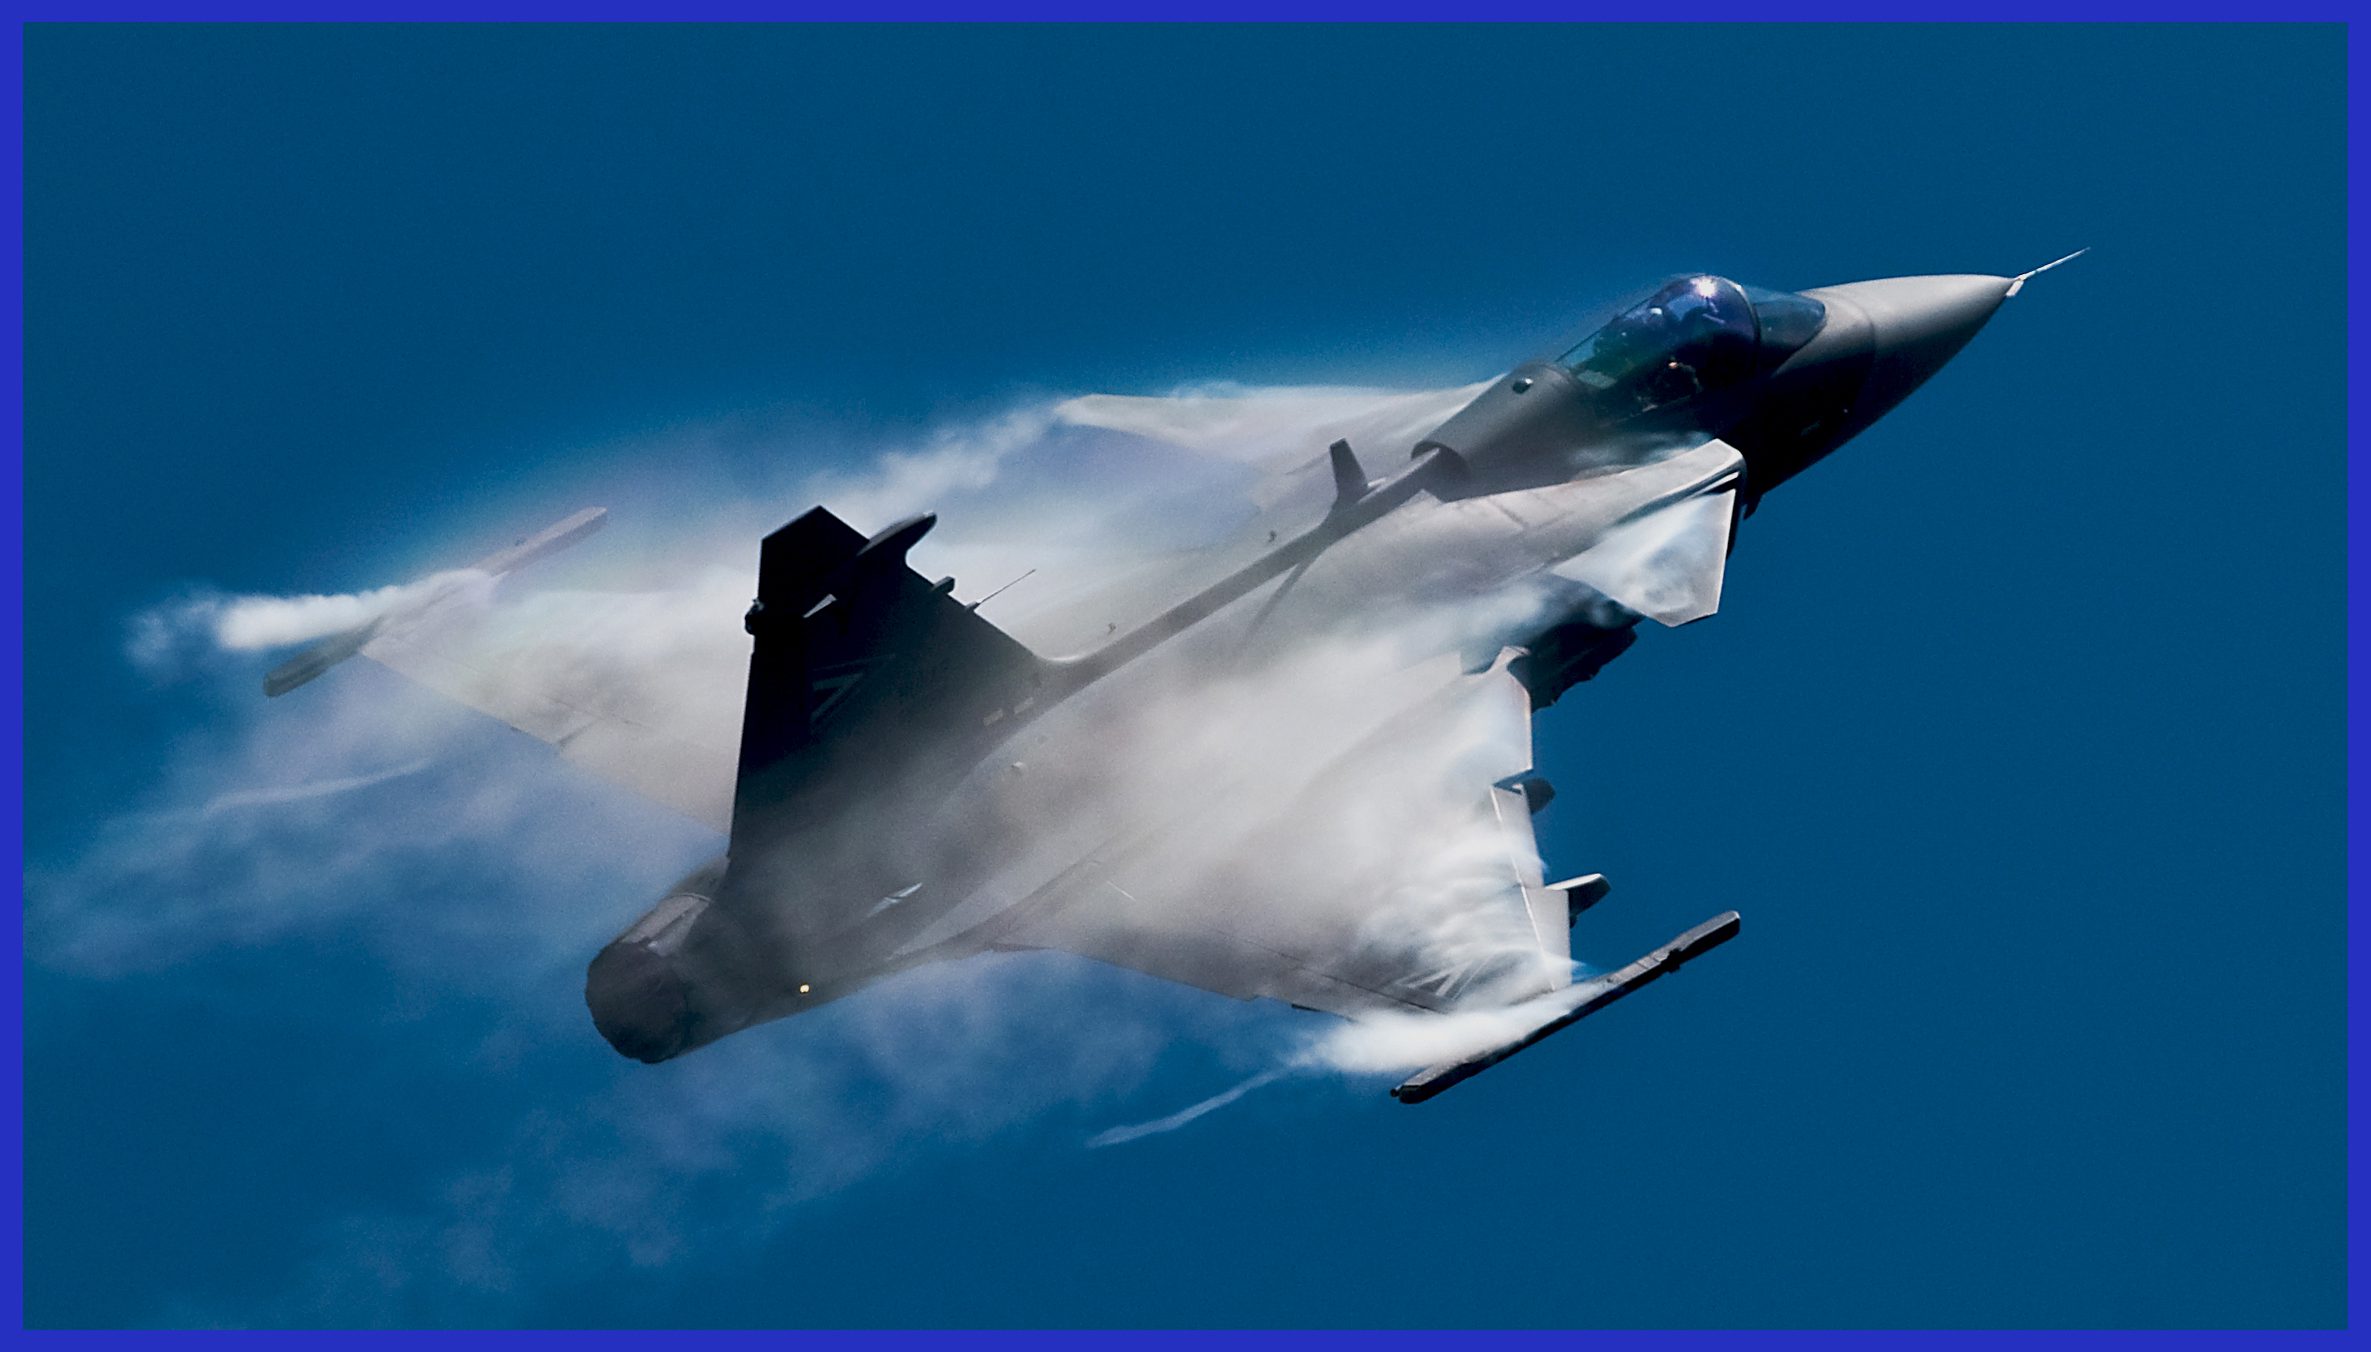  Photo Credit: Hesja Air-Art Photography / The Gripen is on the verge of breaking the first sound barrier